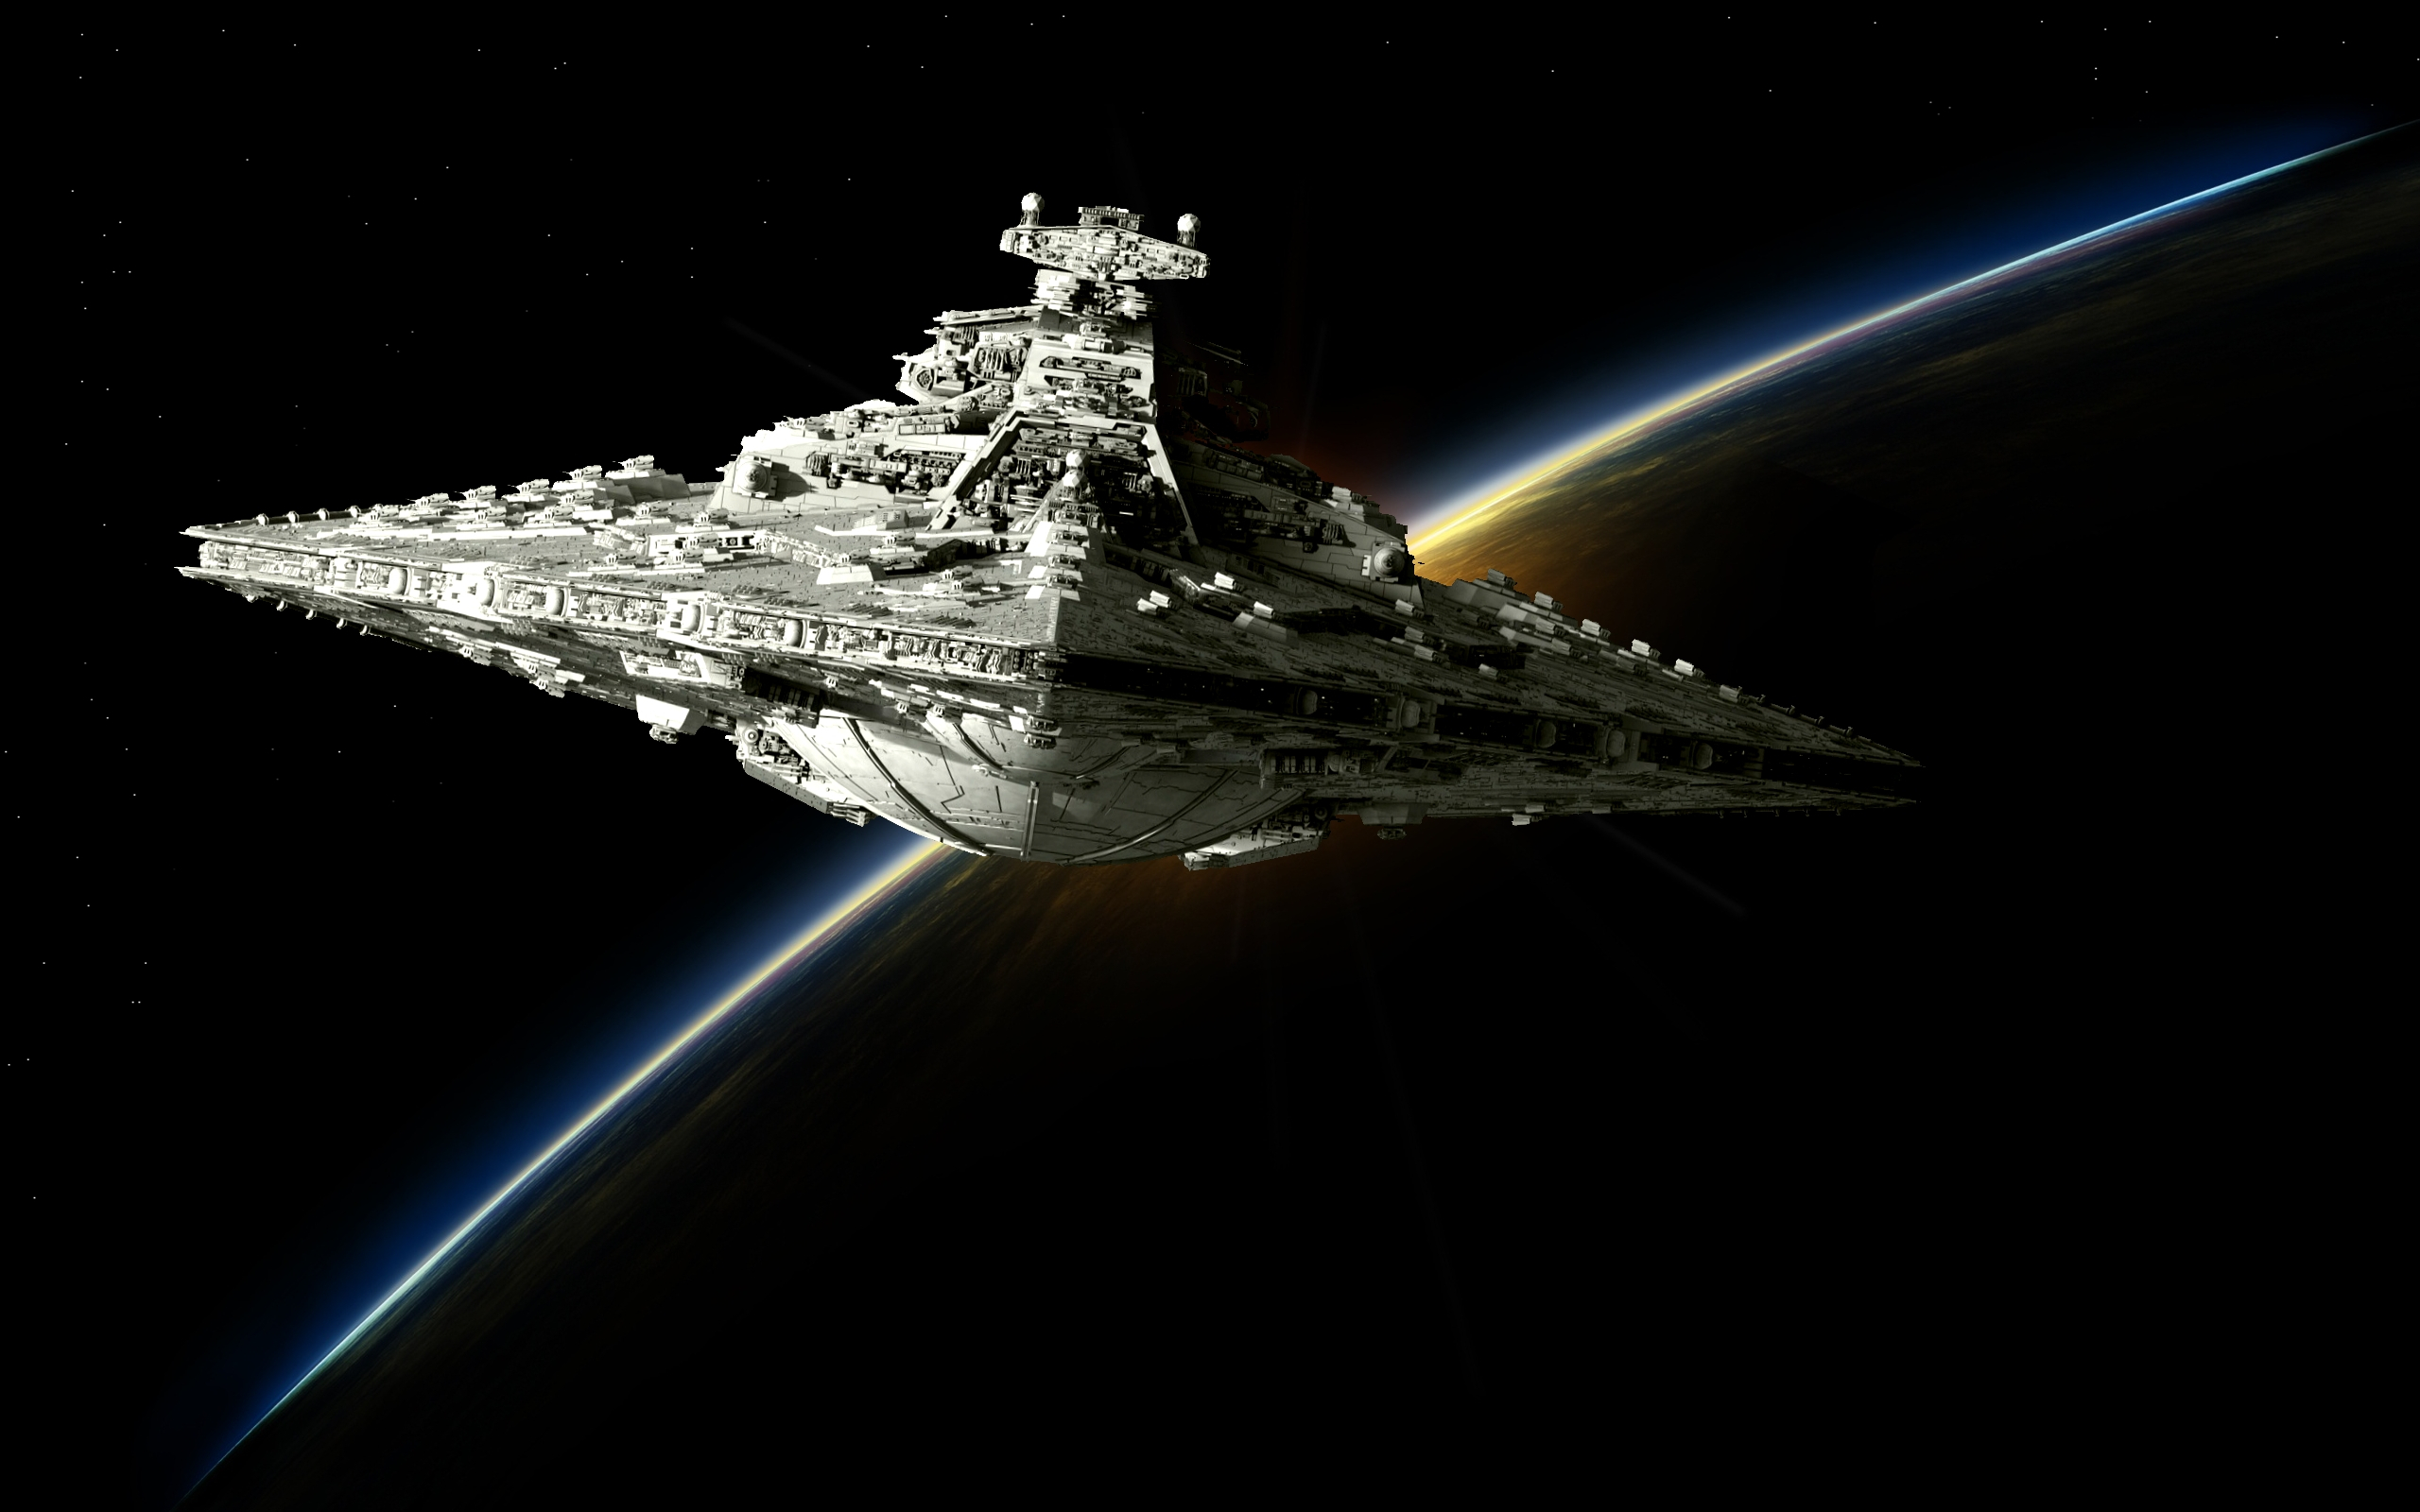 10 Latest Star Wars Ships Wallpaper FULL HD 1080p For PC Background 2021